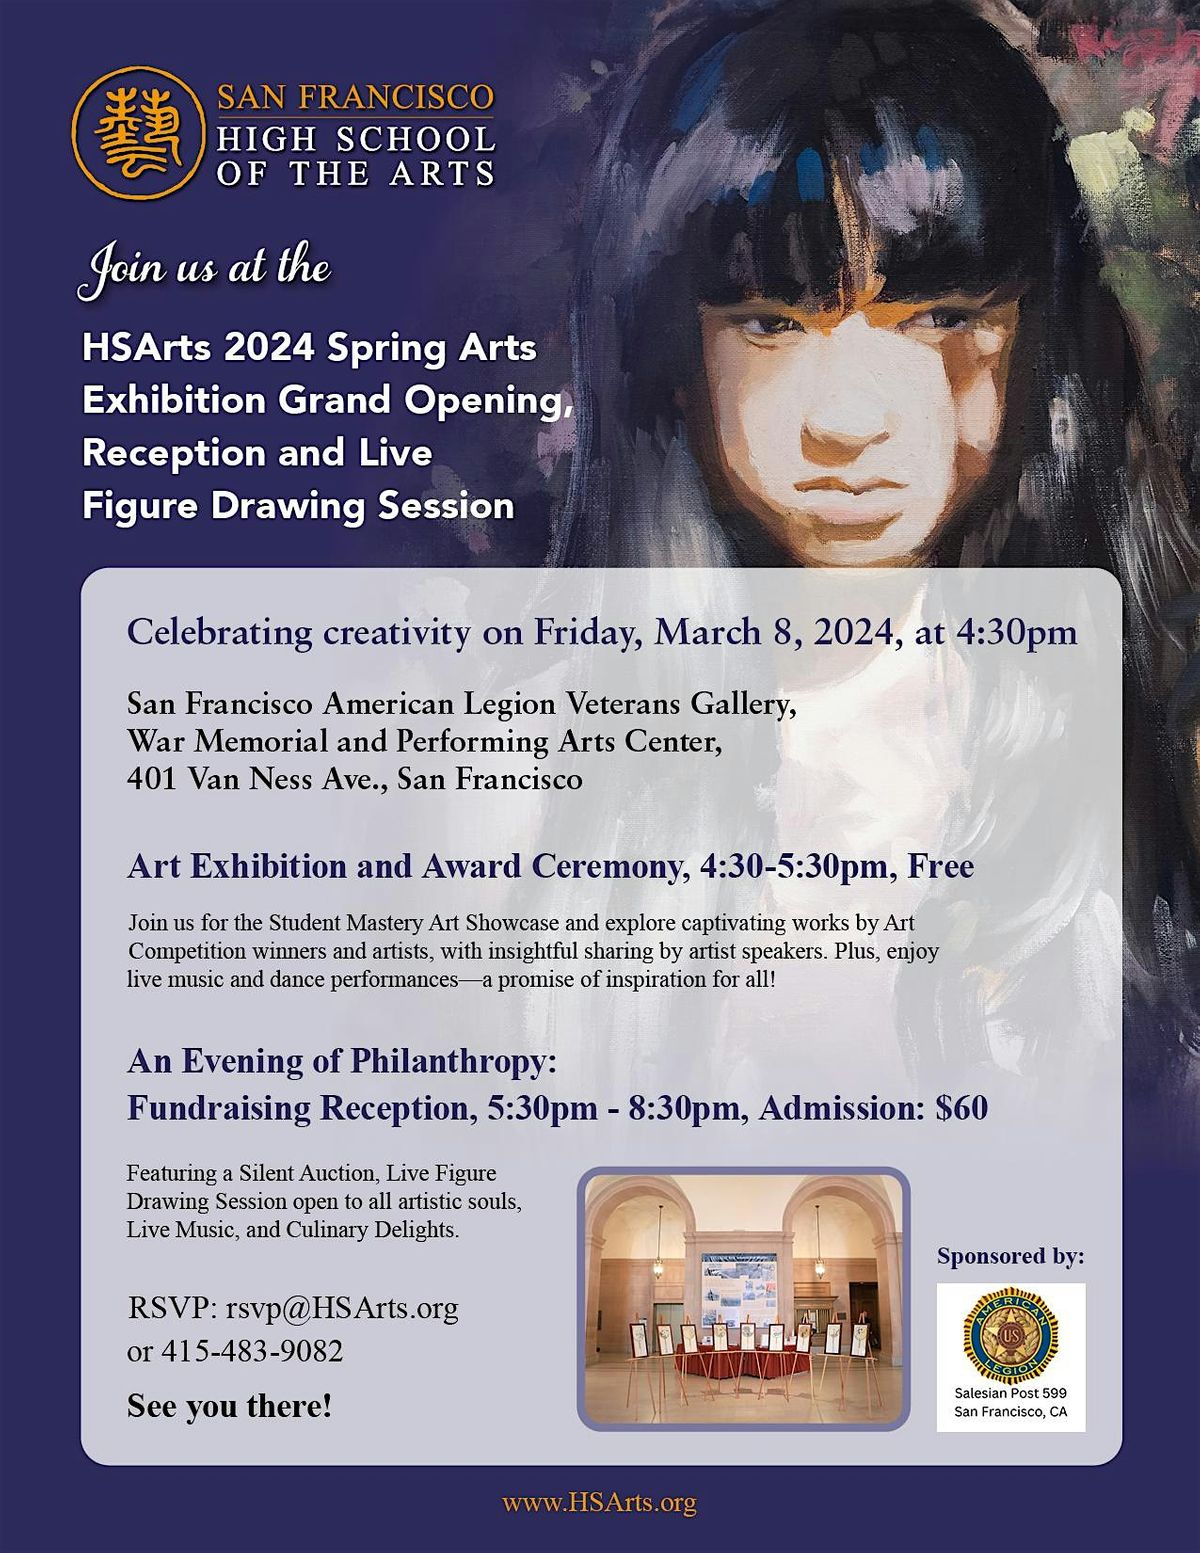 HSArts 2024 Spring Arts Exhibition Grand Opening, Figure Drawing & More